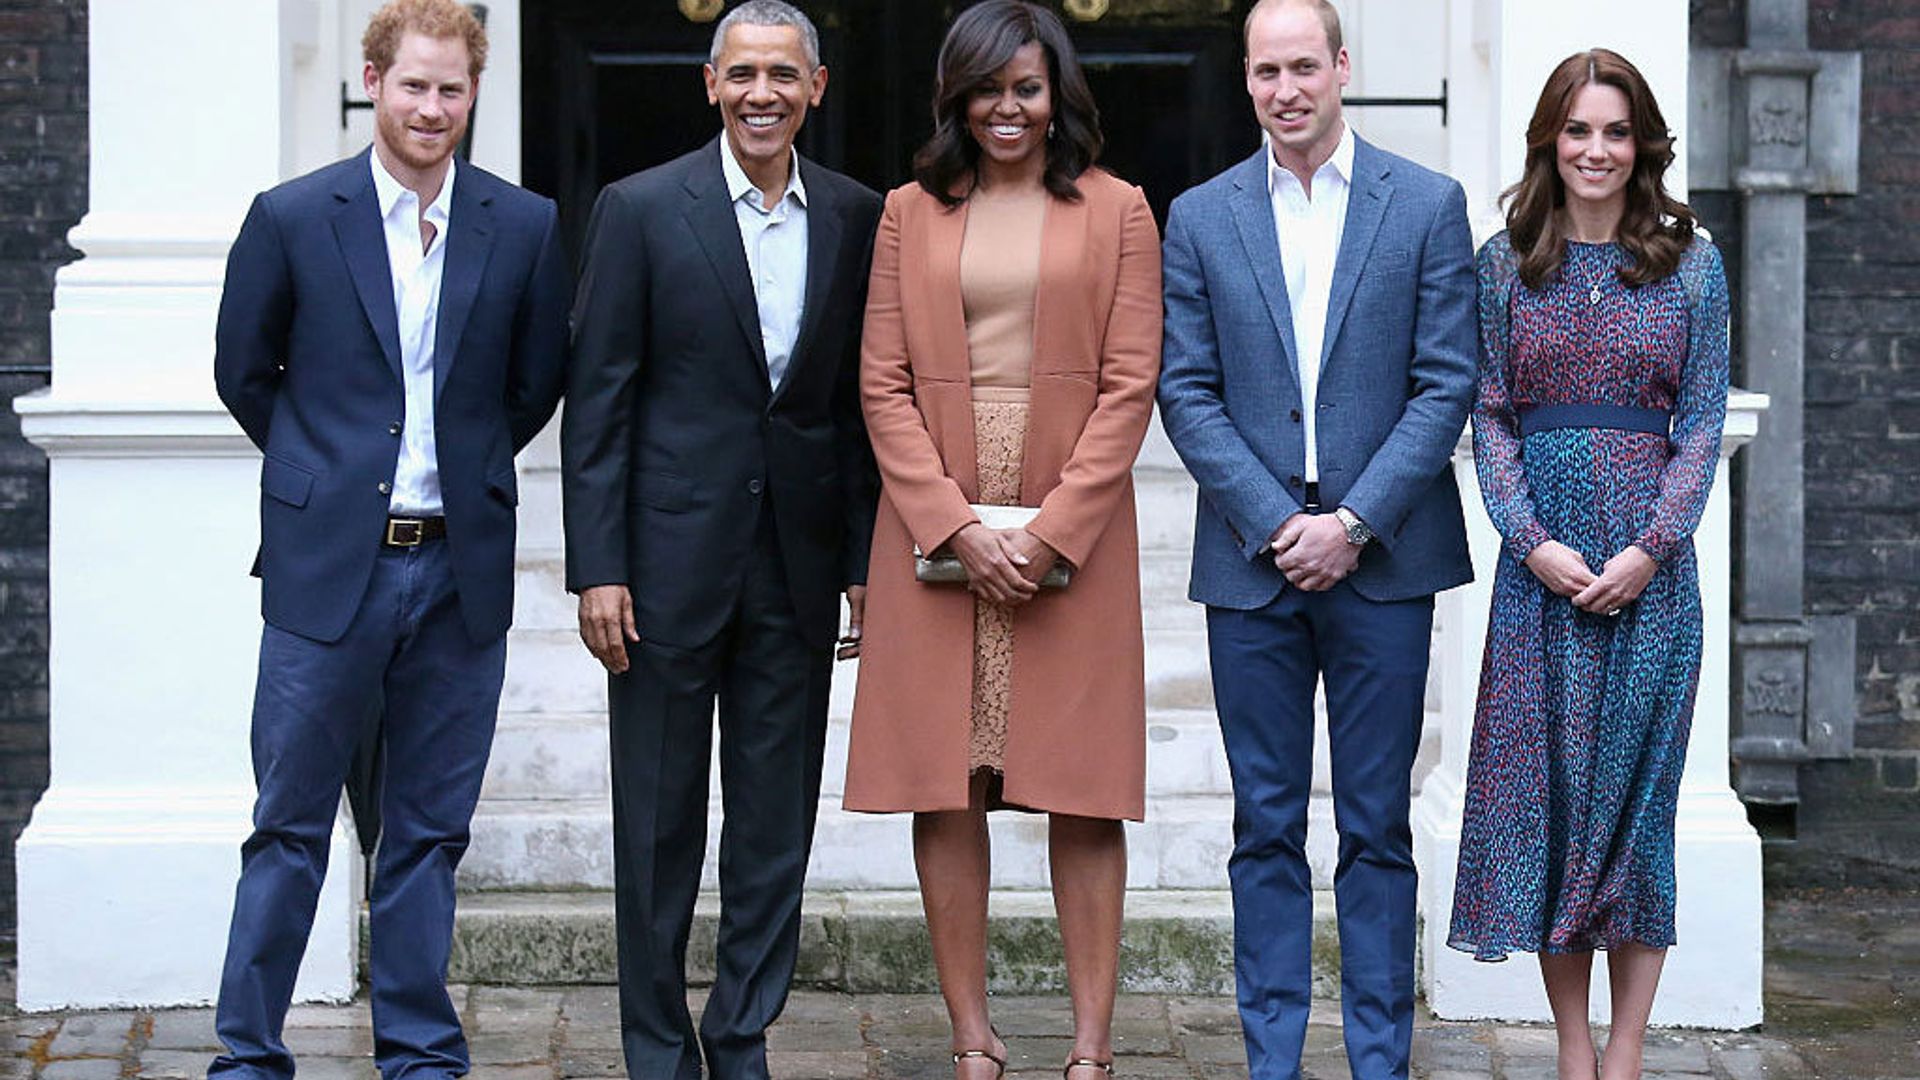 Every photo from President Obama and Michelle's day with the British royals